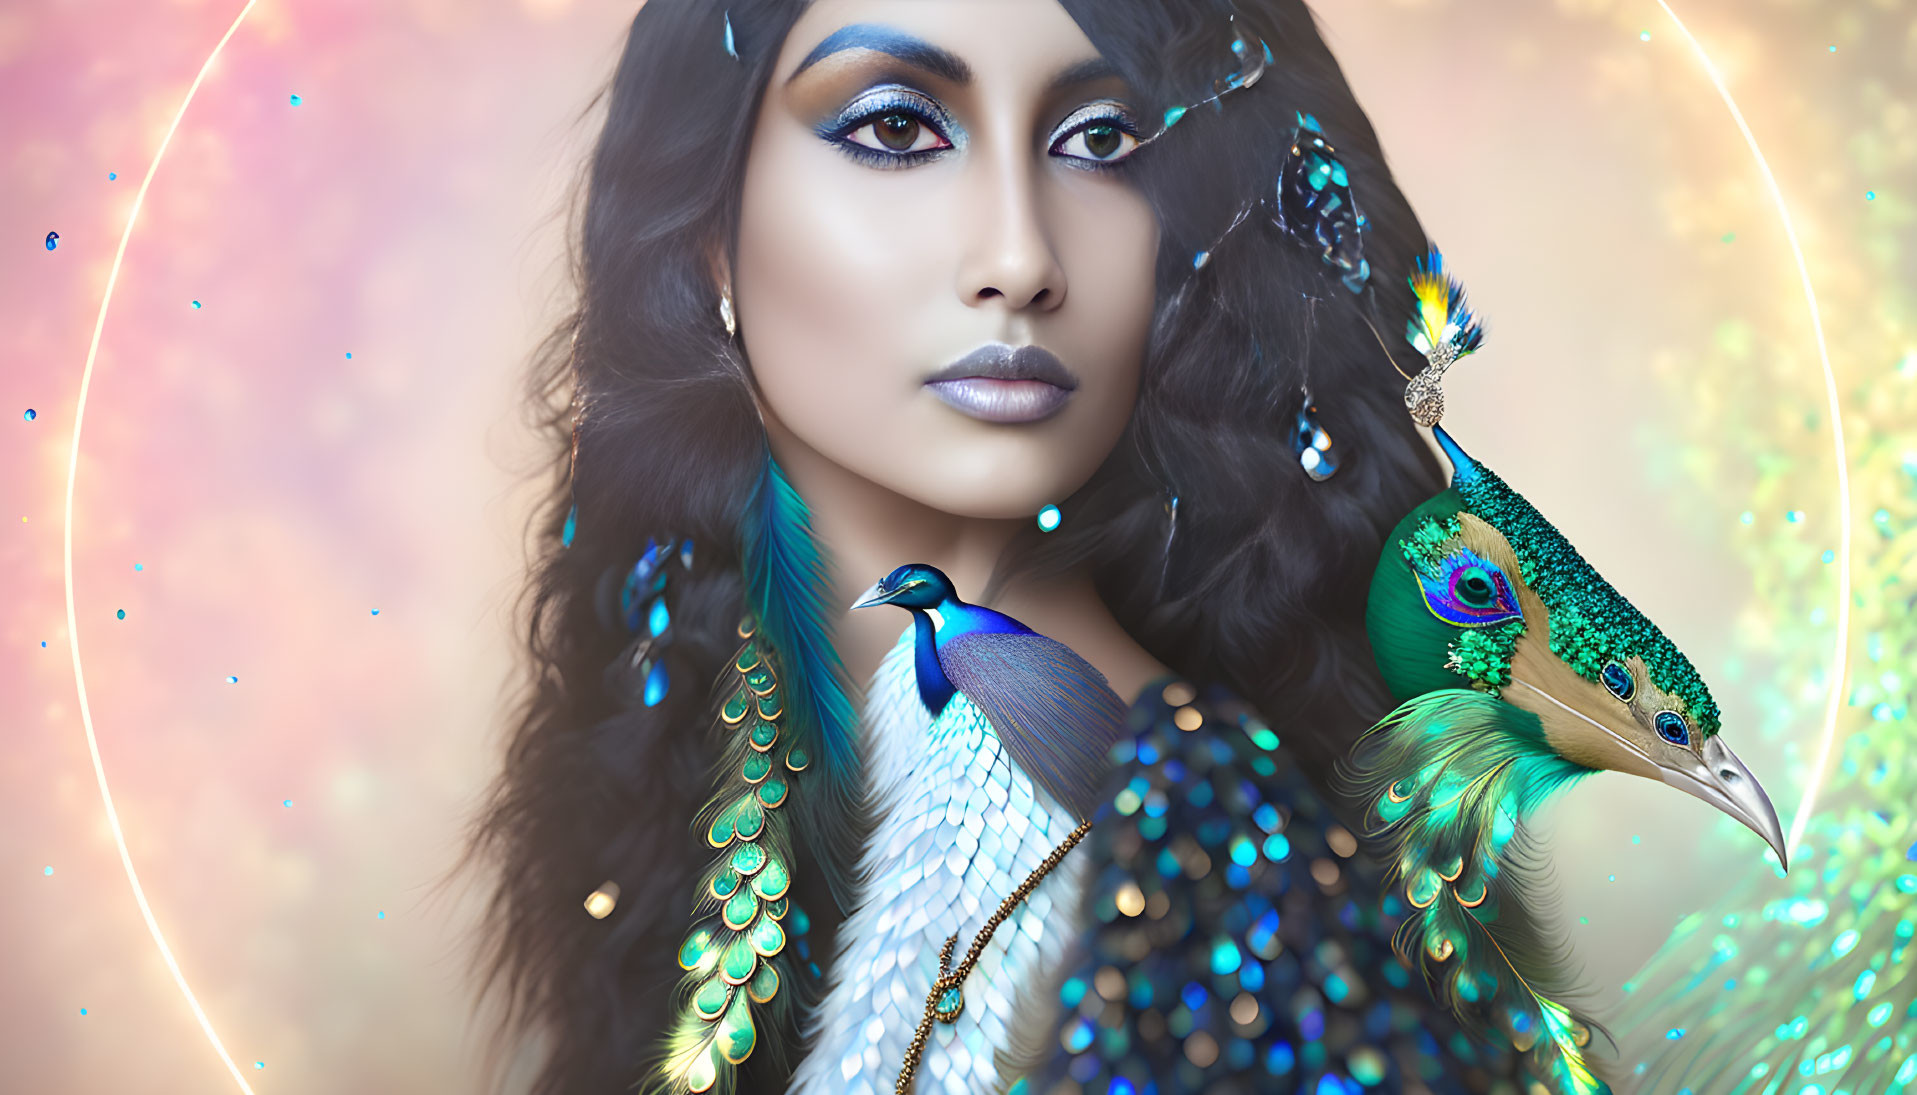 Woman with Peacock-Inspired Makeup and Feathers Next to Vibrant Peacock on Celestial